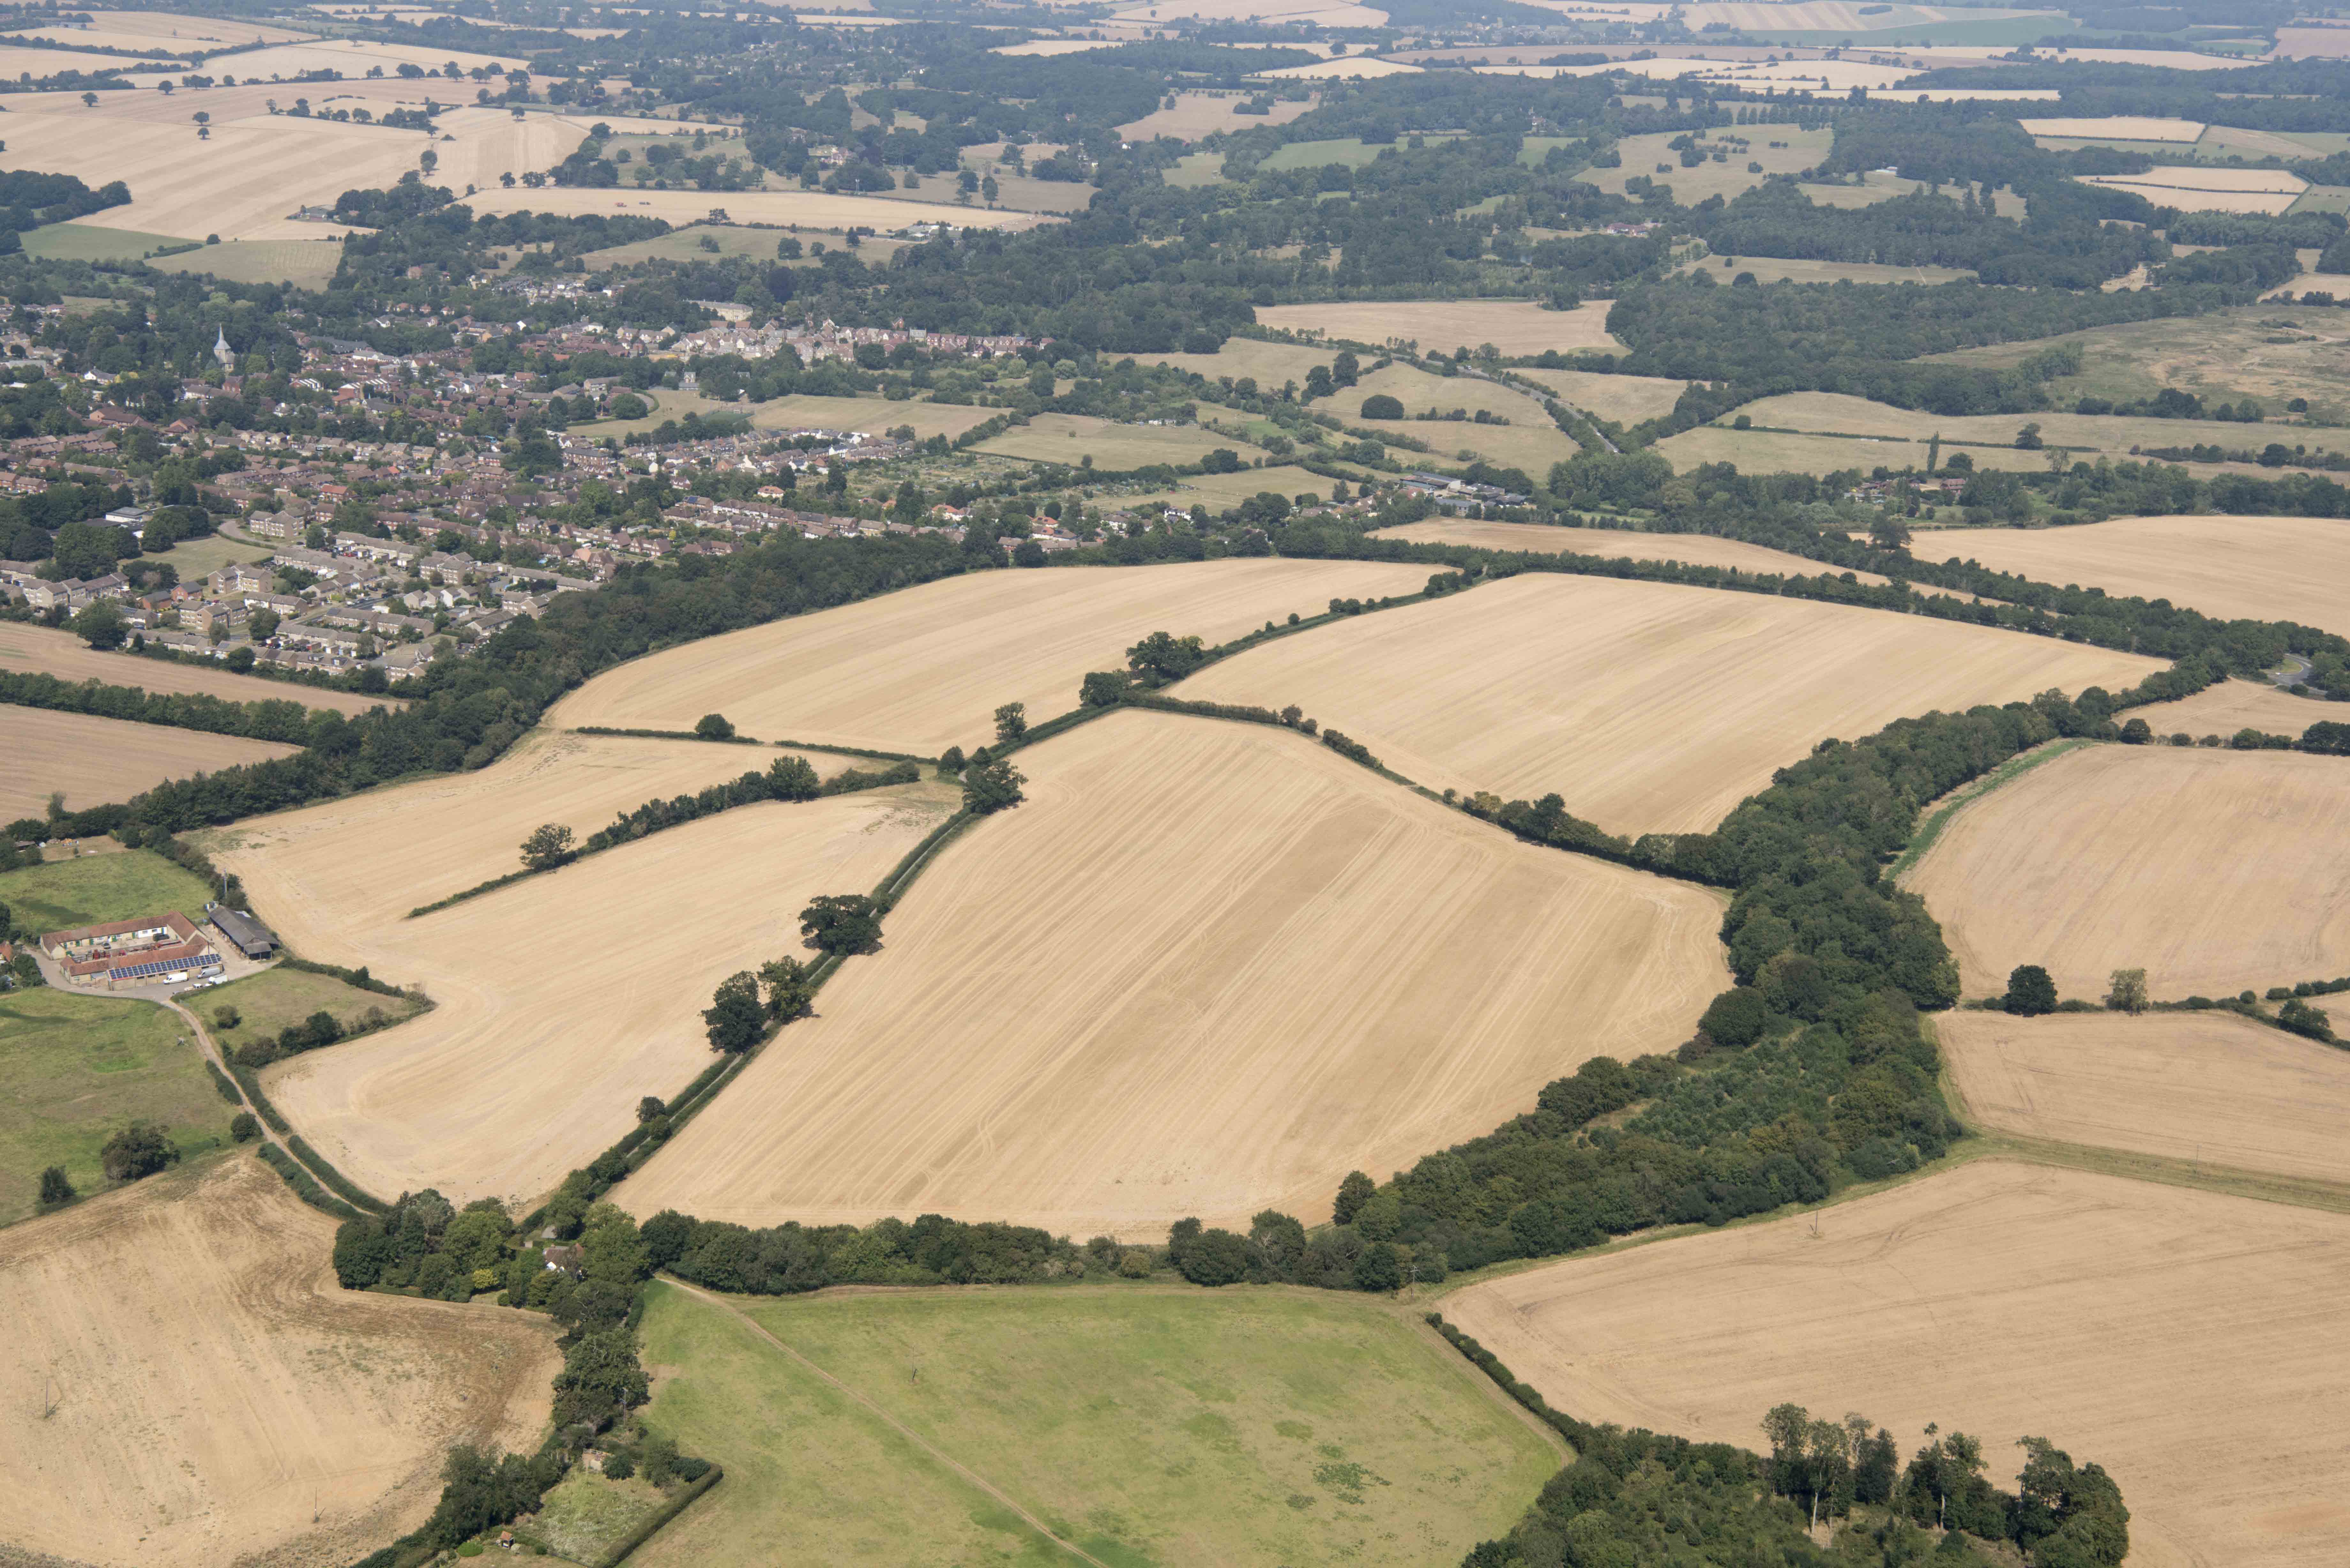 Aerial view of Wheathampstead earthwork and surrounding landscape